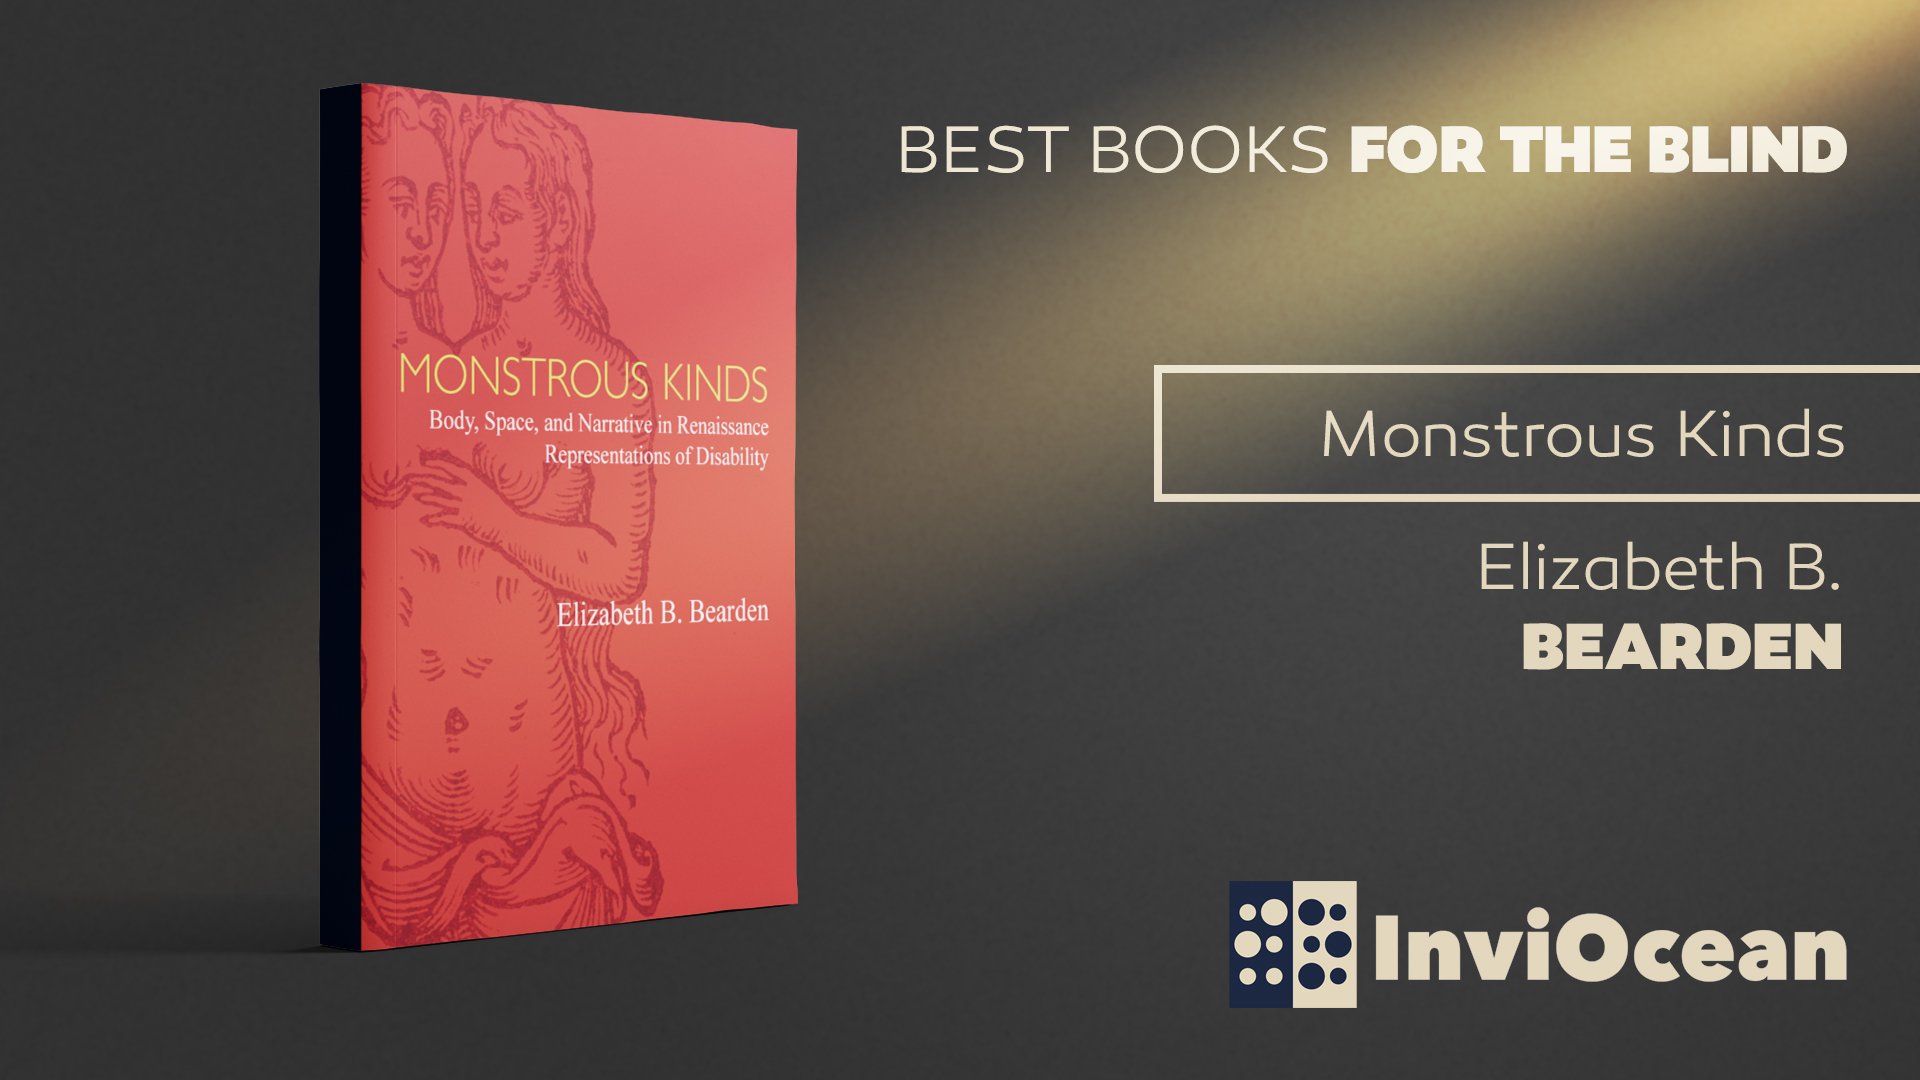 Monstrous Kinds: Body, Space, and Narrative in Renaissance Representations of Disability by Elizabeth B. Bearden